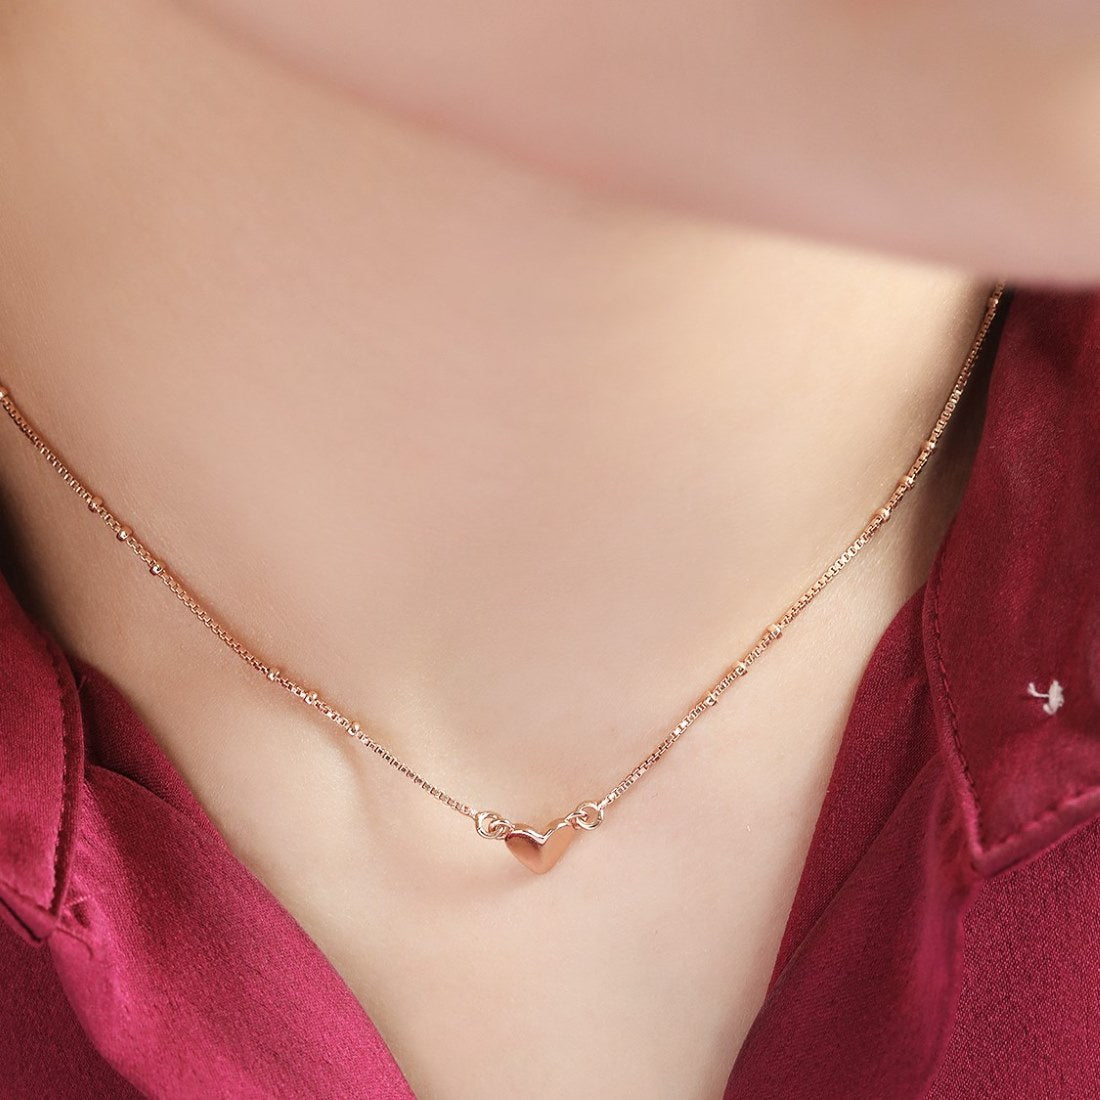 Rose Gold Heartbeat 925 Sterling Silver Necklace